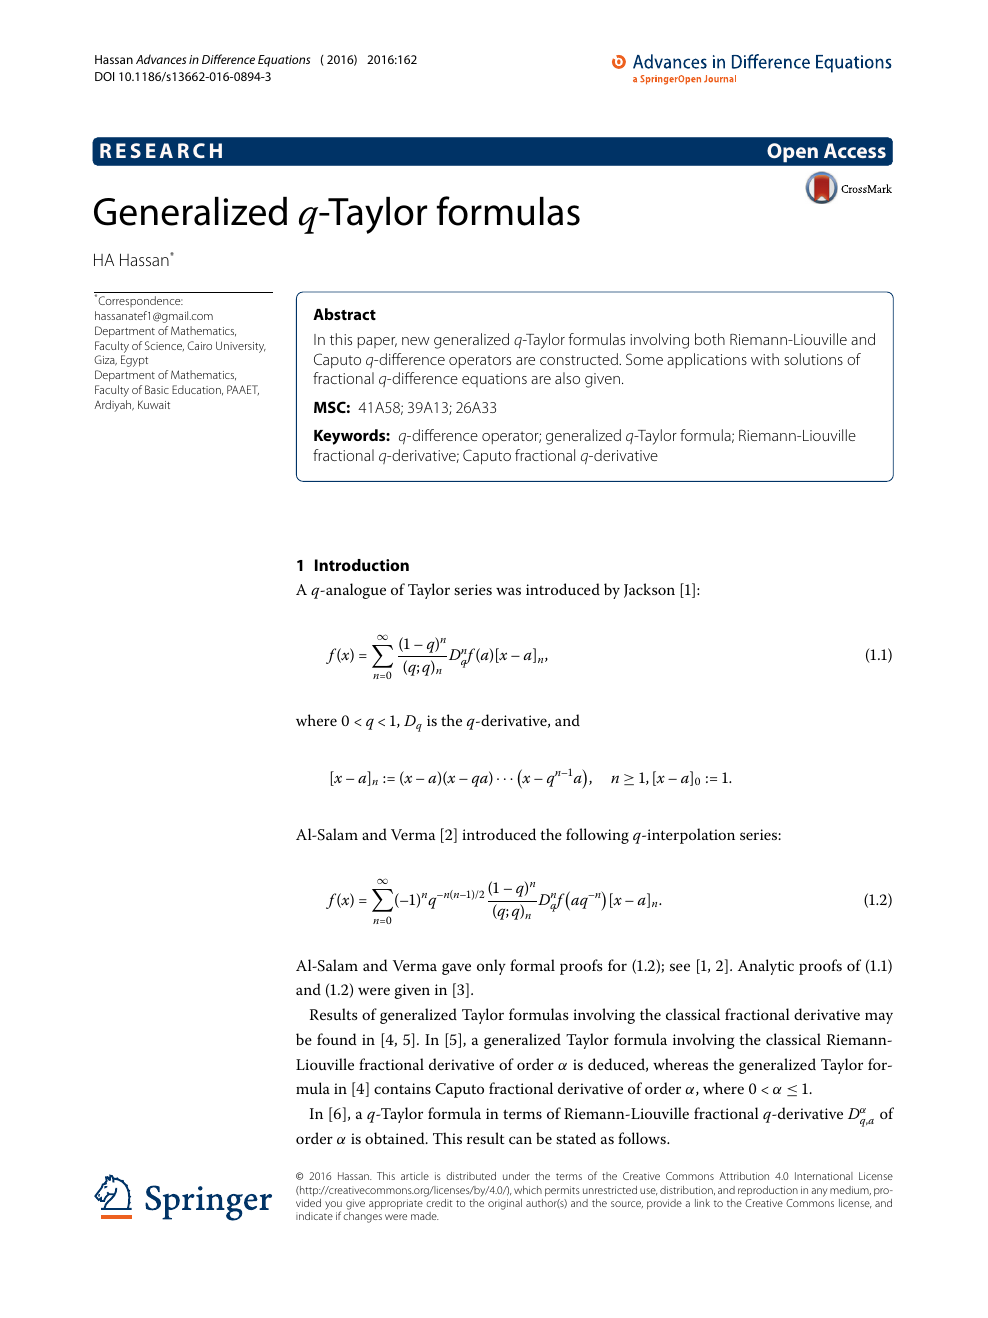 Generalized Q Taylor Formulas Topic Of Research Paper In Mathematics Download Scholarly Article Pdf And Read For Free On Cyberleninka Open Science Hub